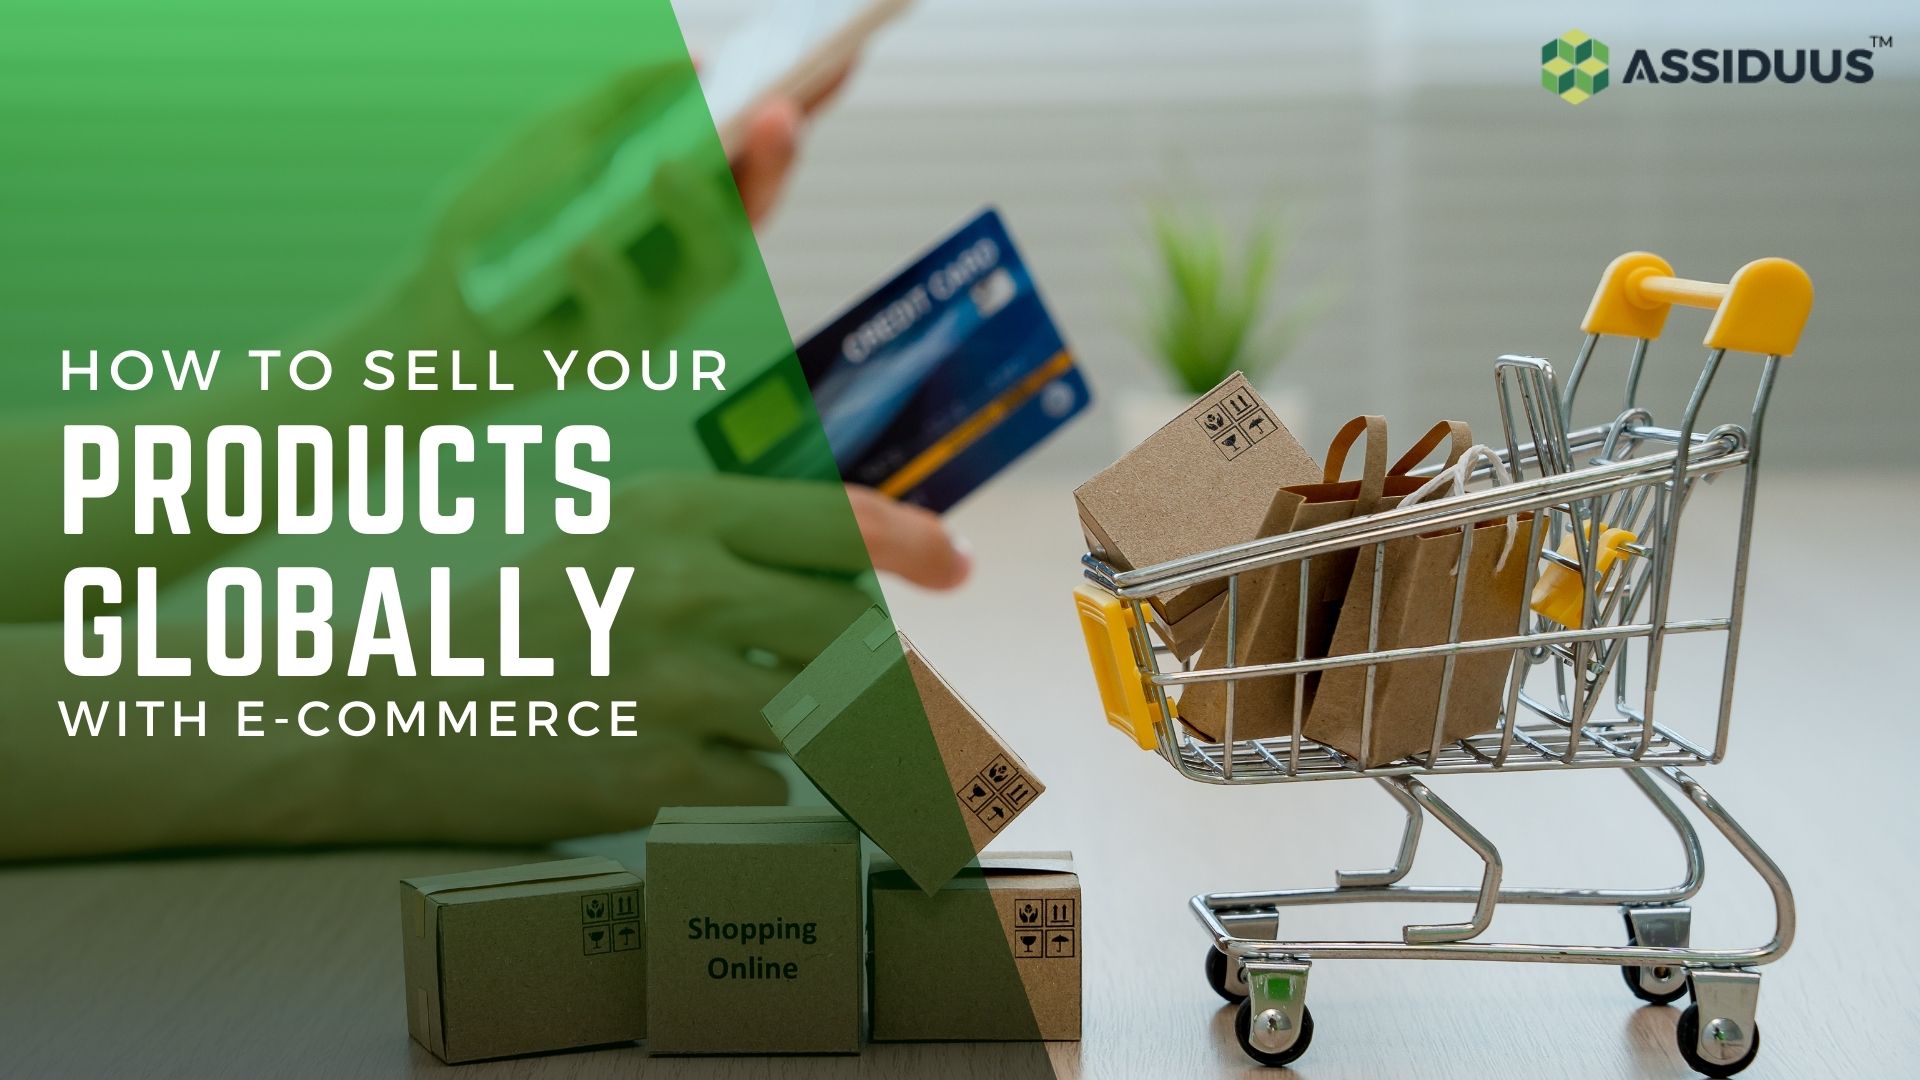 How To Sell Your Products Globally With E-commerce